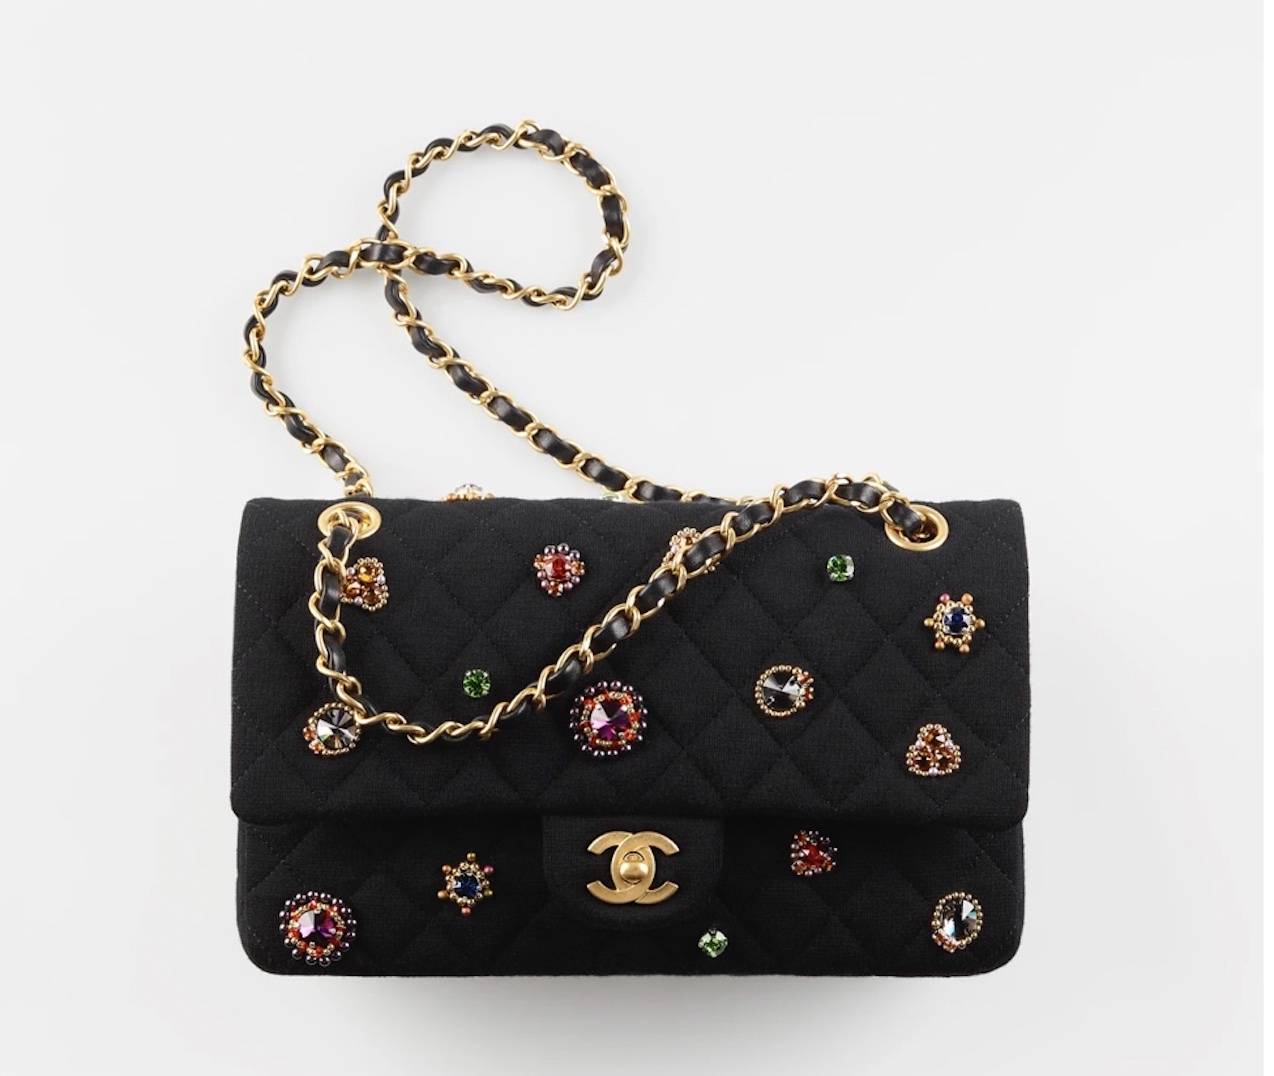 Learn All About One of This Season's Hottest Bags: The Chanel 22 - The Vault